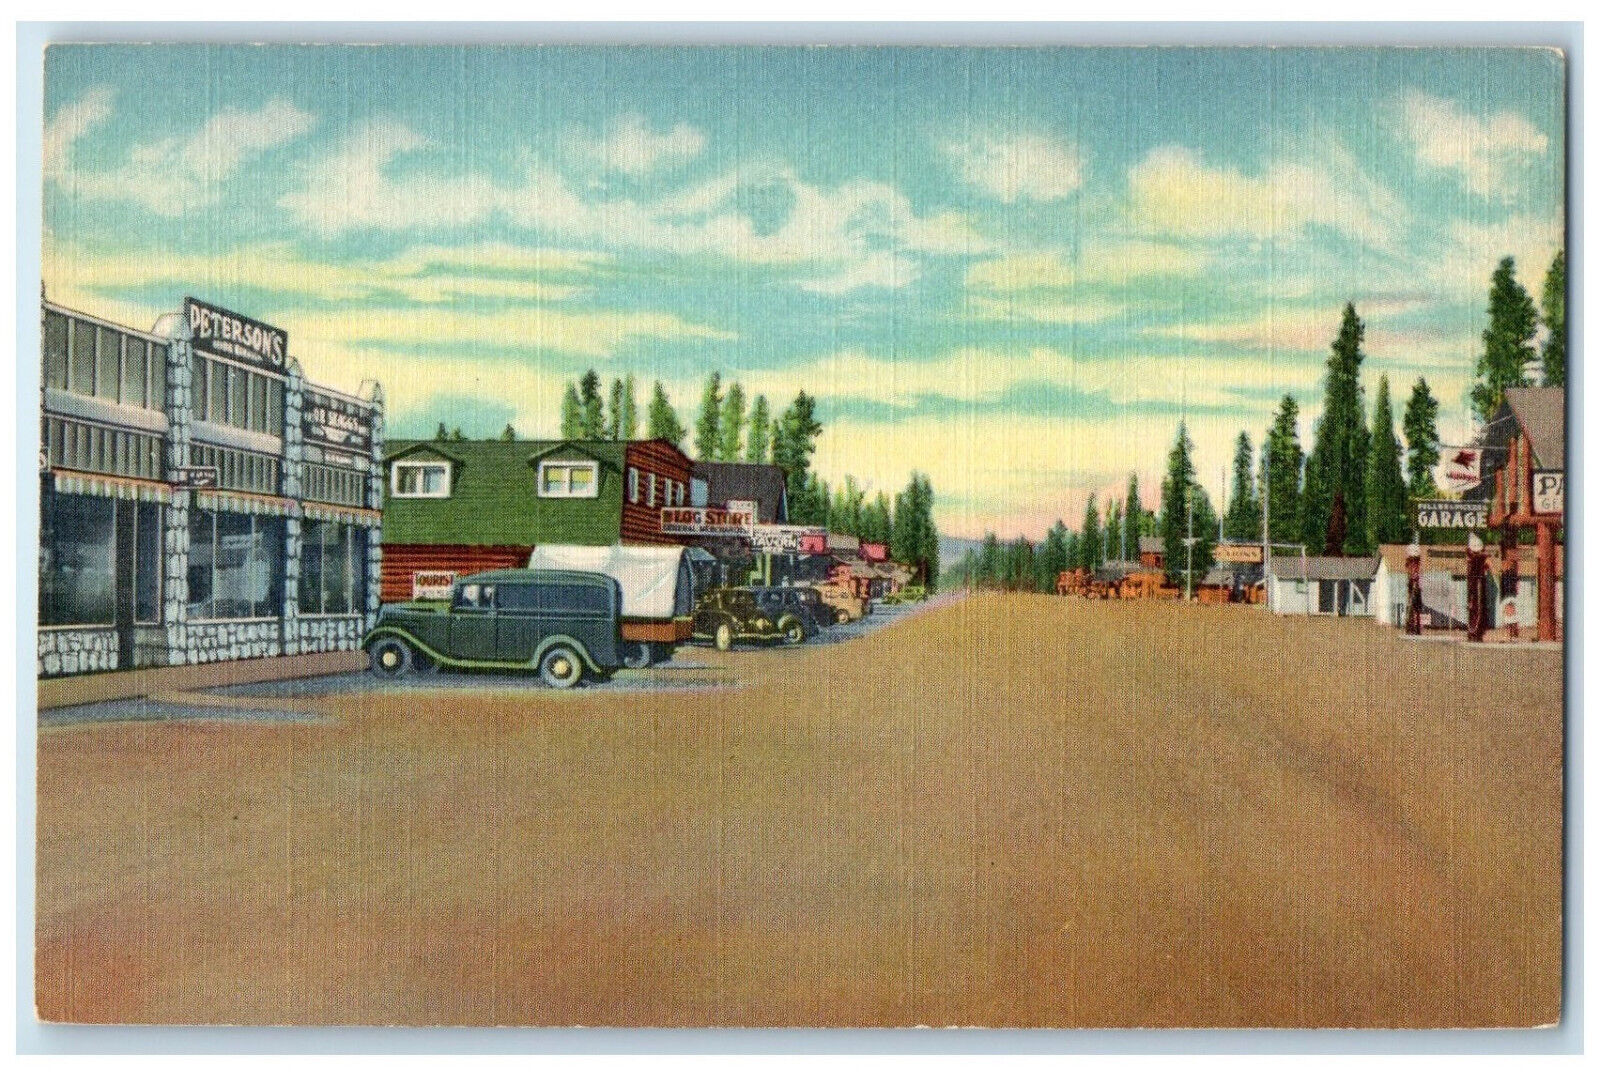 c1940's West Entrance to Yellowstone National Park Montana MT Vintage Postcard